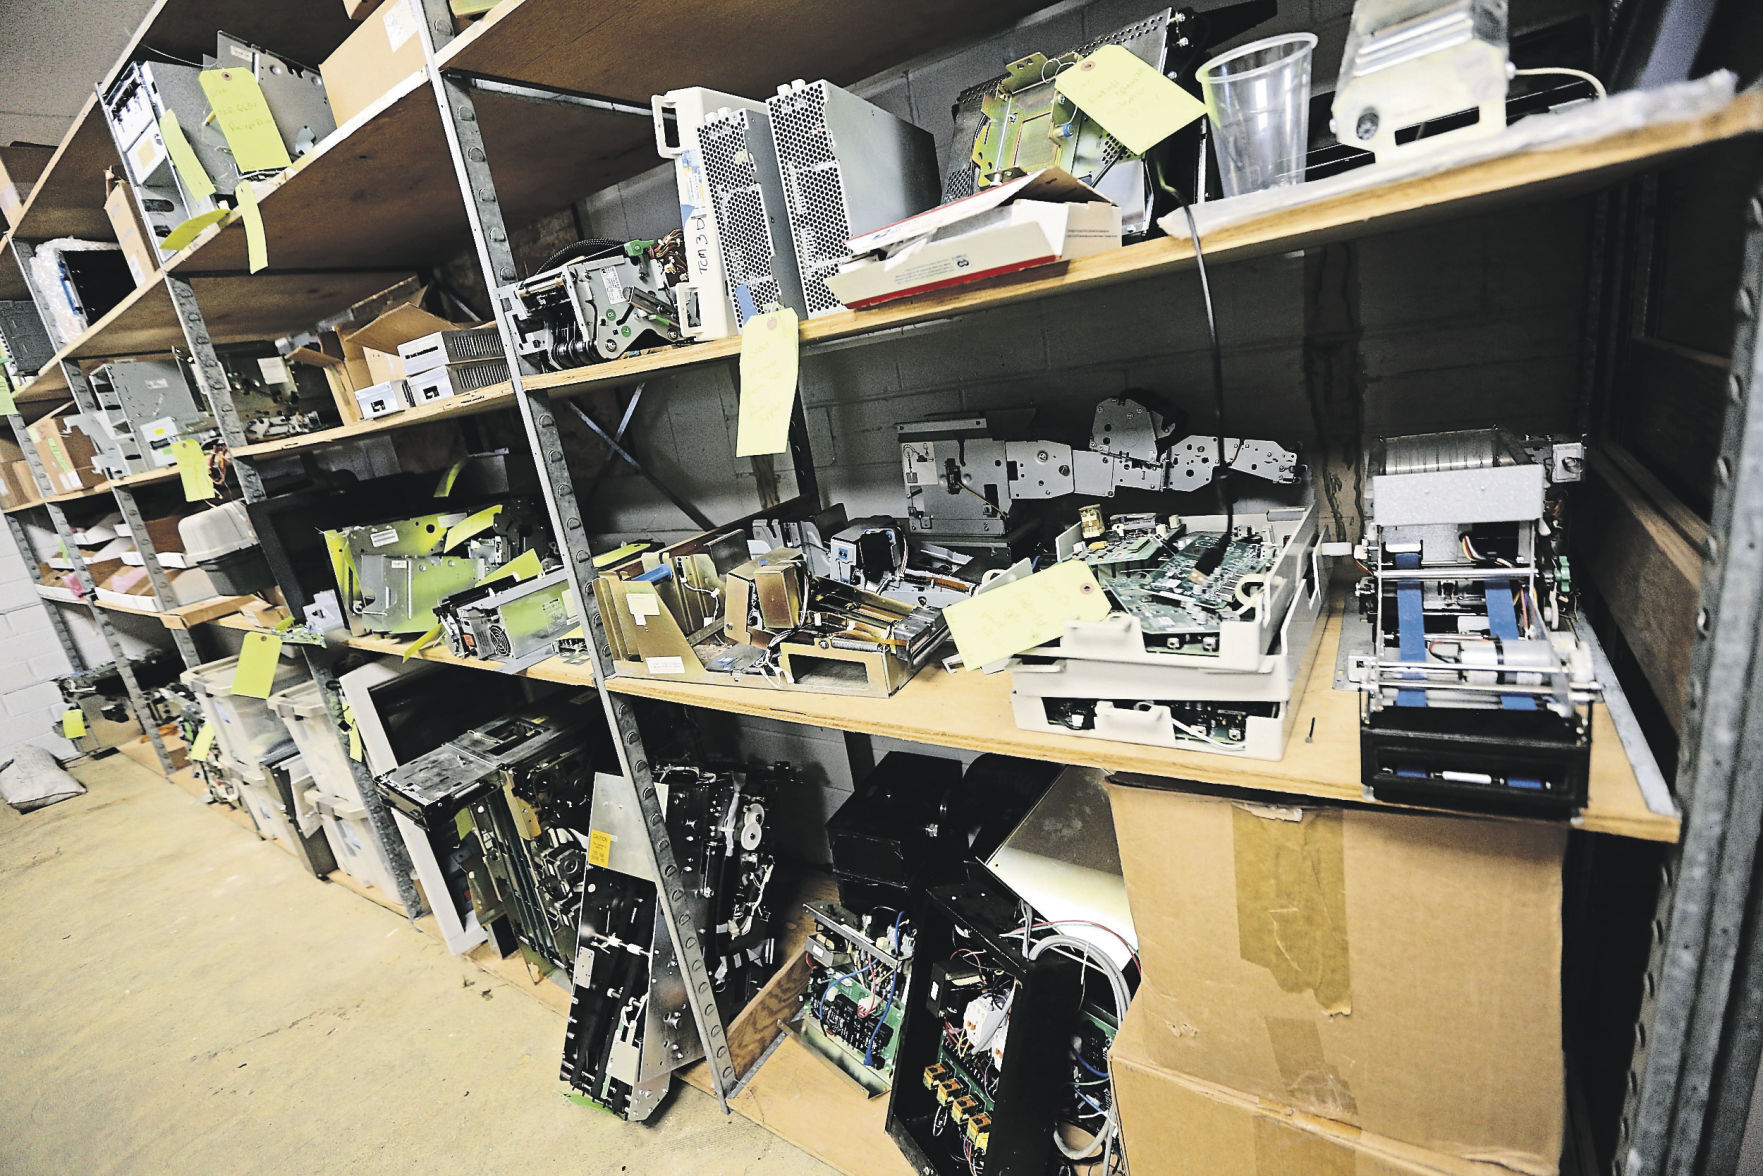 A collection of ATM parts used to service products are kept in storage. PHOTO CREDIT: Dave Kettering